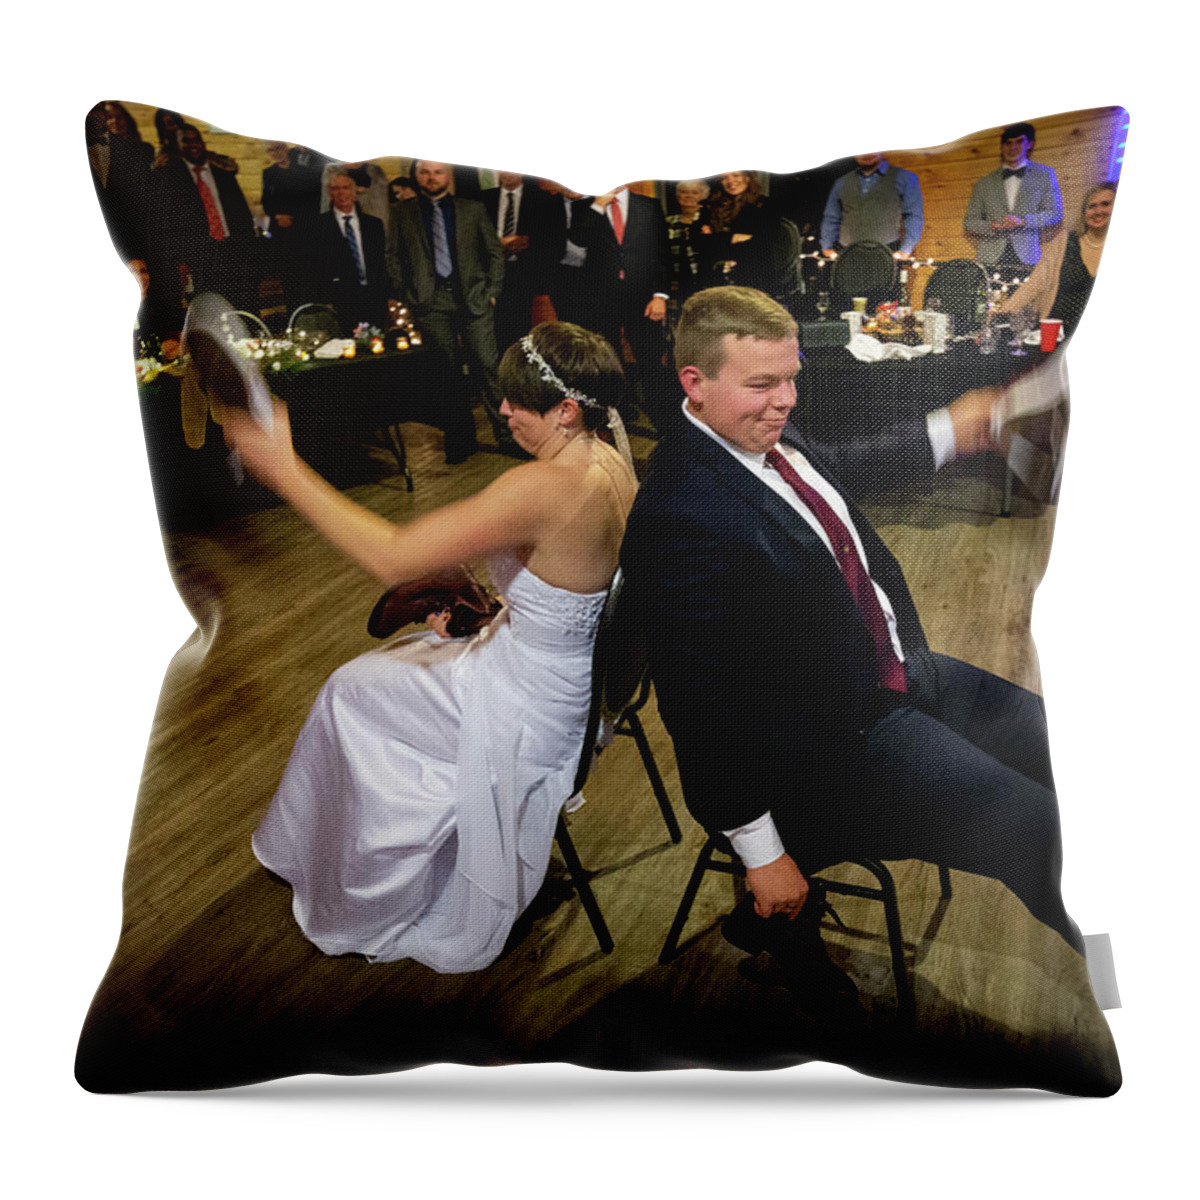 Wedding Throw Pillow featuring the photograph Wedding Reception #1 by Jim Whitley